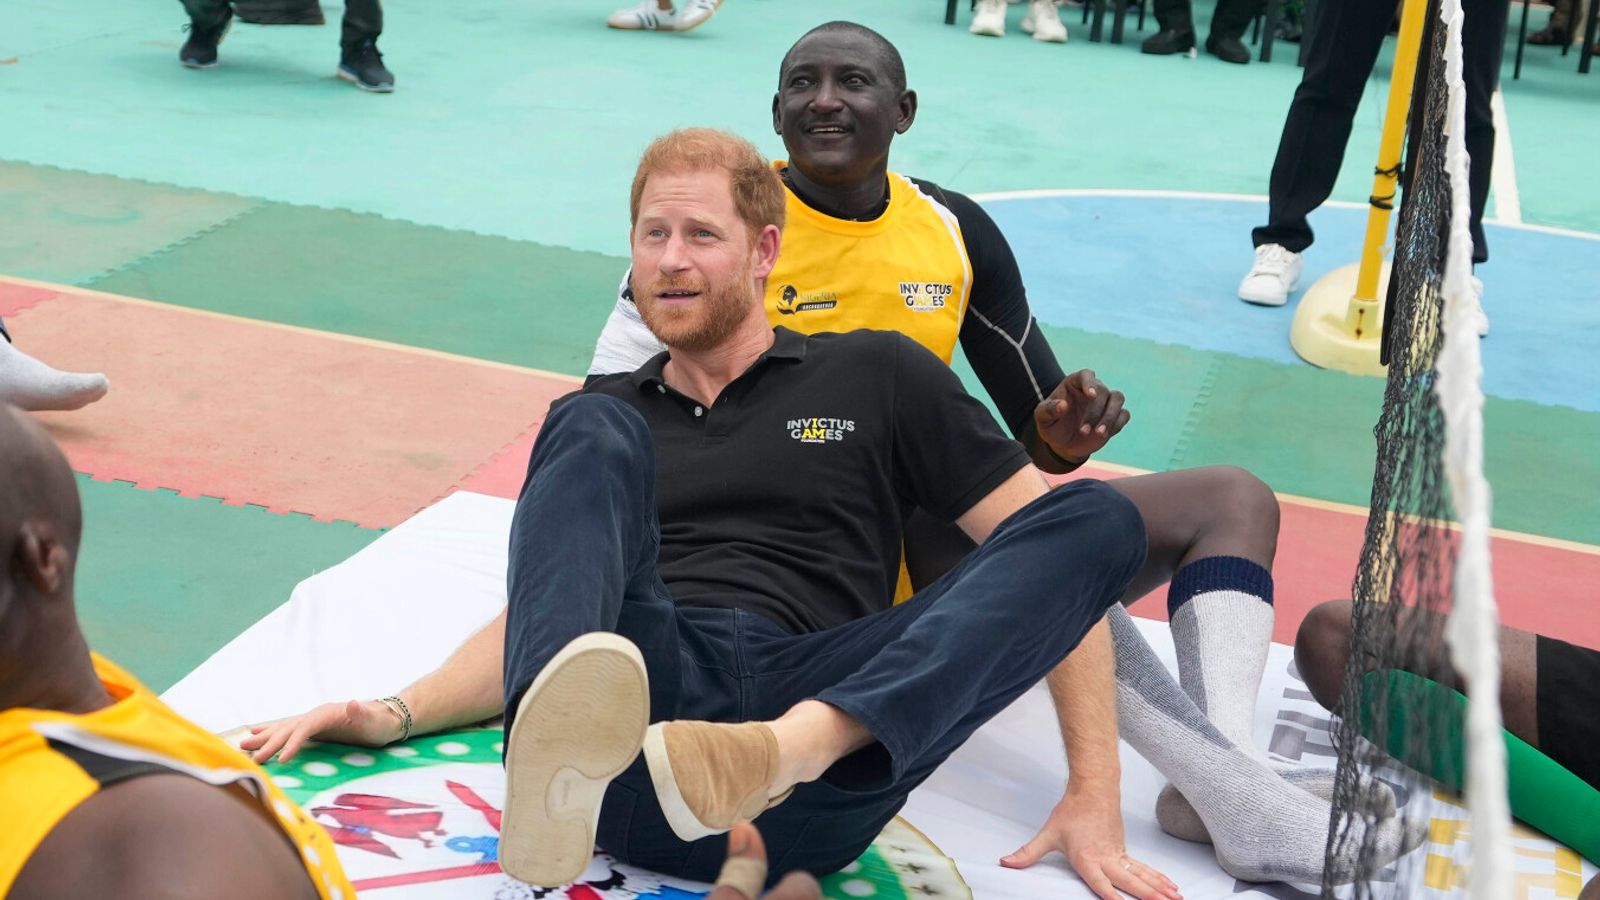 Prince Harry plays sitting volleyball on Nigeria tour with Meghan